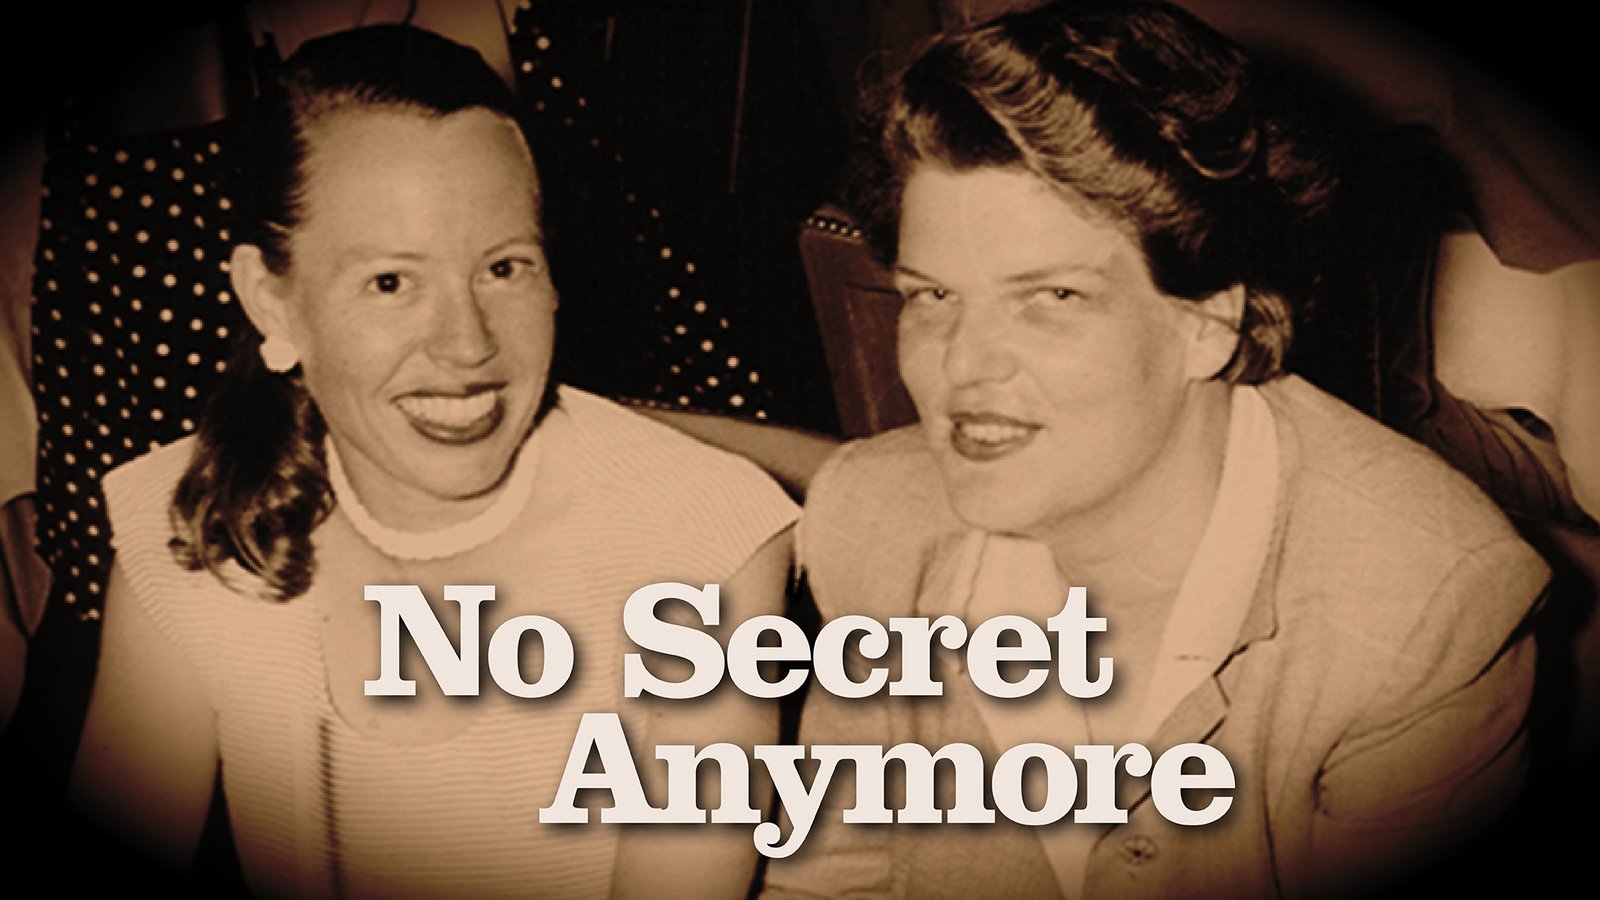 No Secret Anymore - Founders of the Modern Lesbian Civil Rights Movement